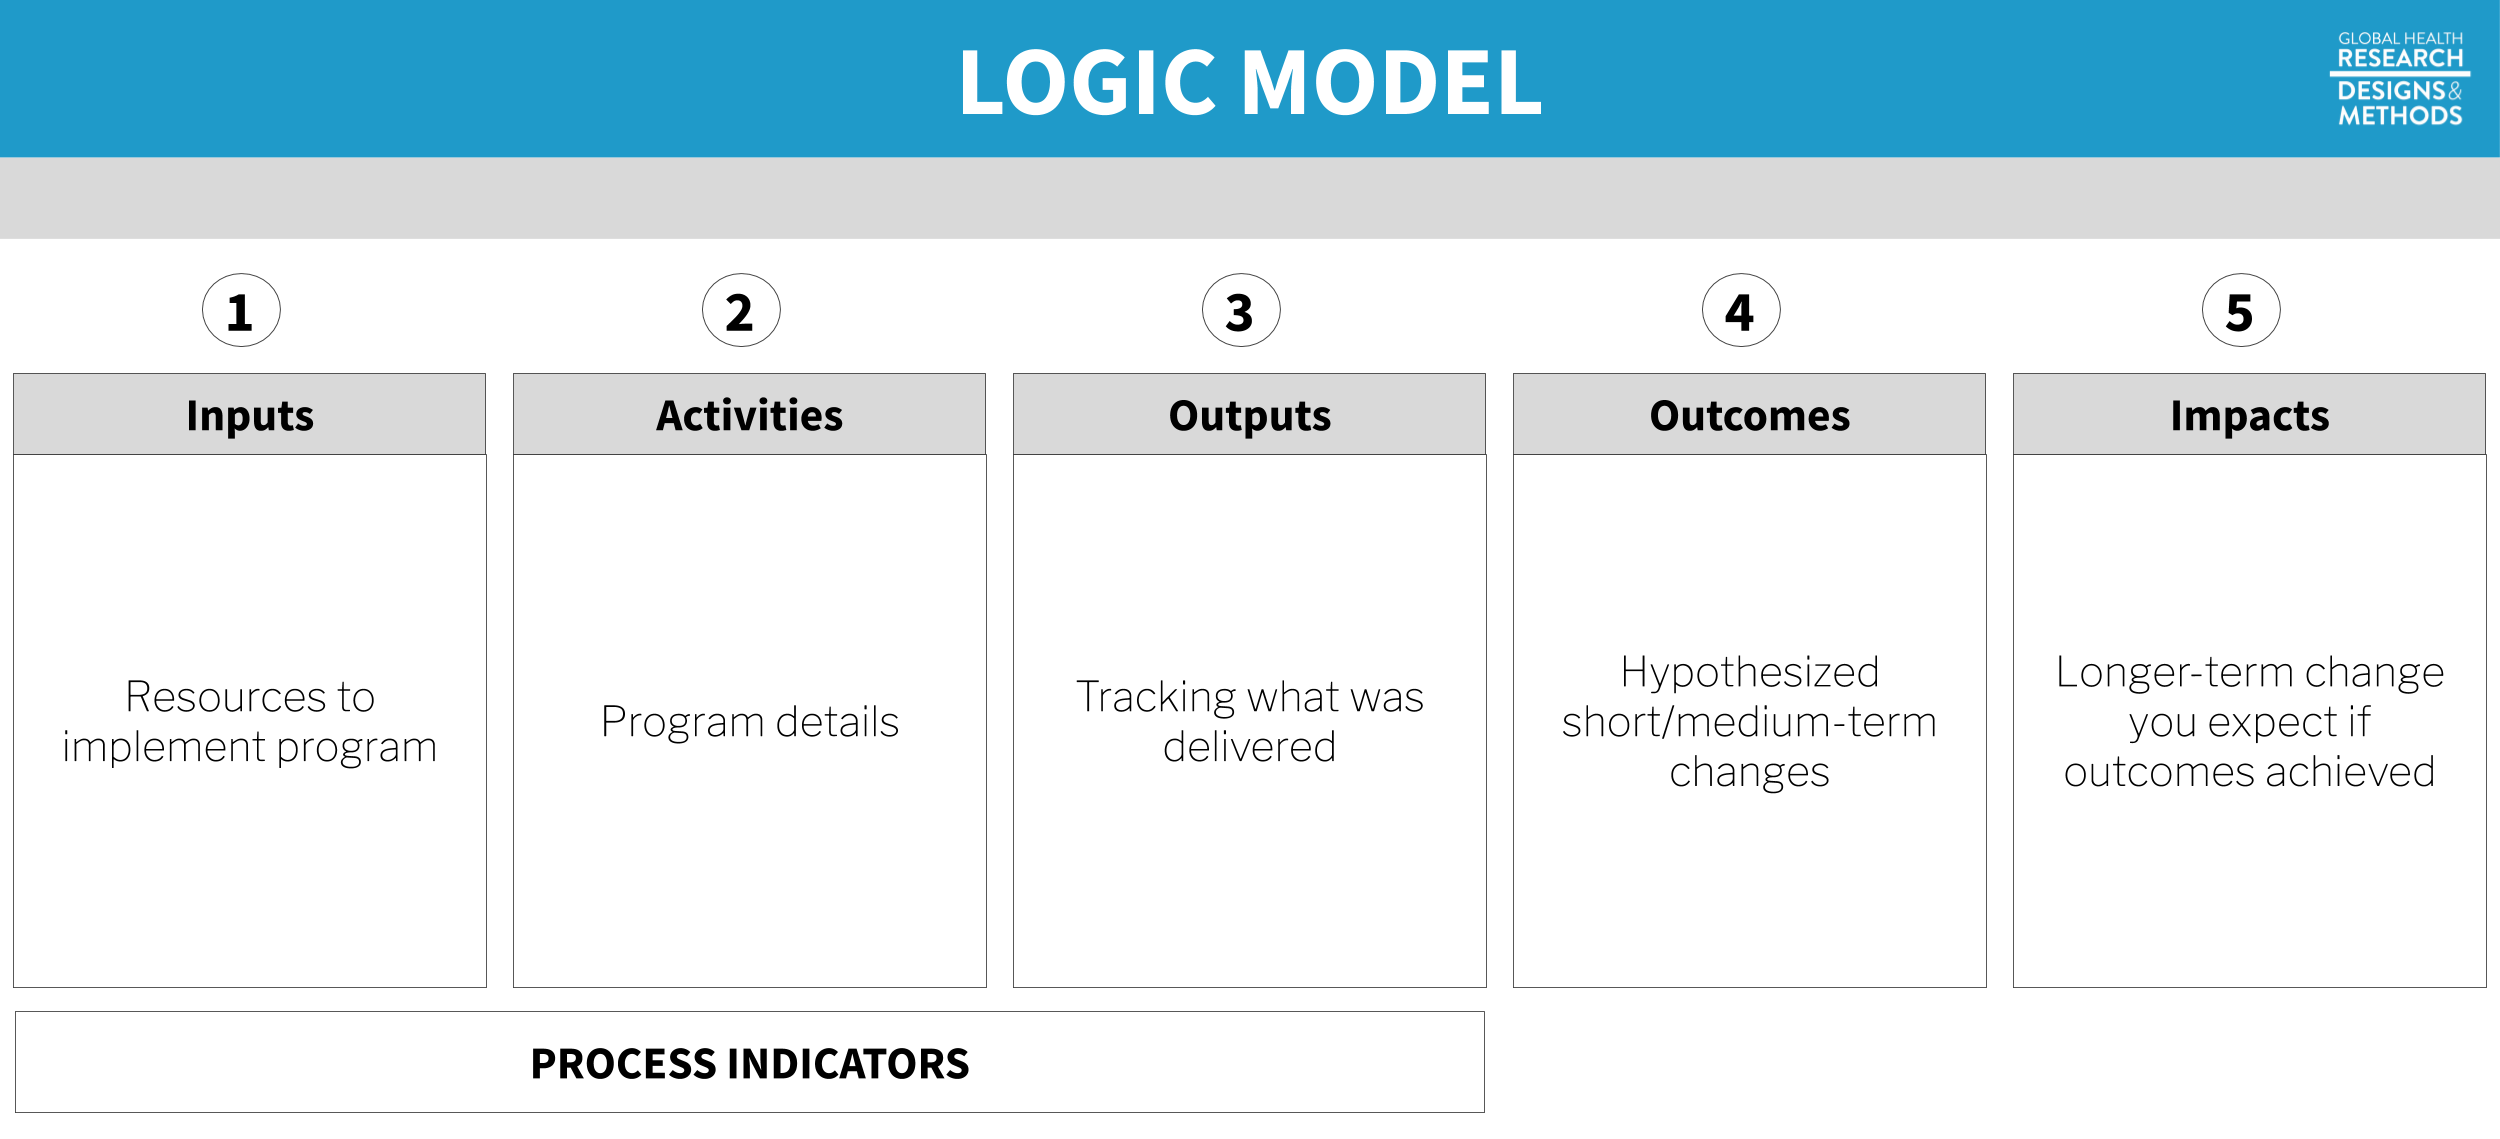 Logic model. Process indicators in a logic model capture how well a program is implemented—the “M” (monitoring) in M&E. As researchers, we care about collecting good process and monitoring data to develop a better understanding why programs do or do not work. For example, program costs must be accurately tracked to estimate cost-effectiveness. Or it may be important to determine whether the intervention was delivered according to the plan.